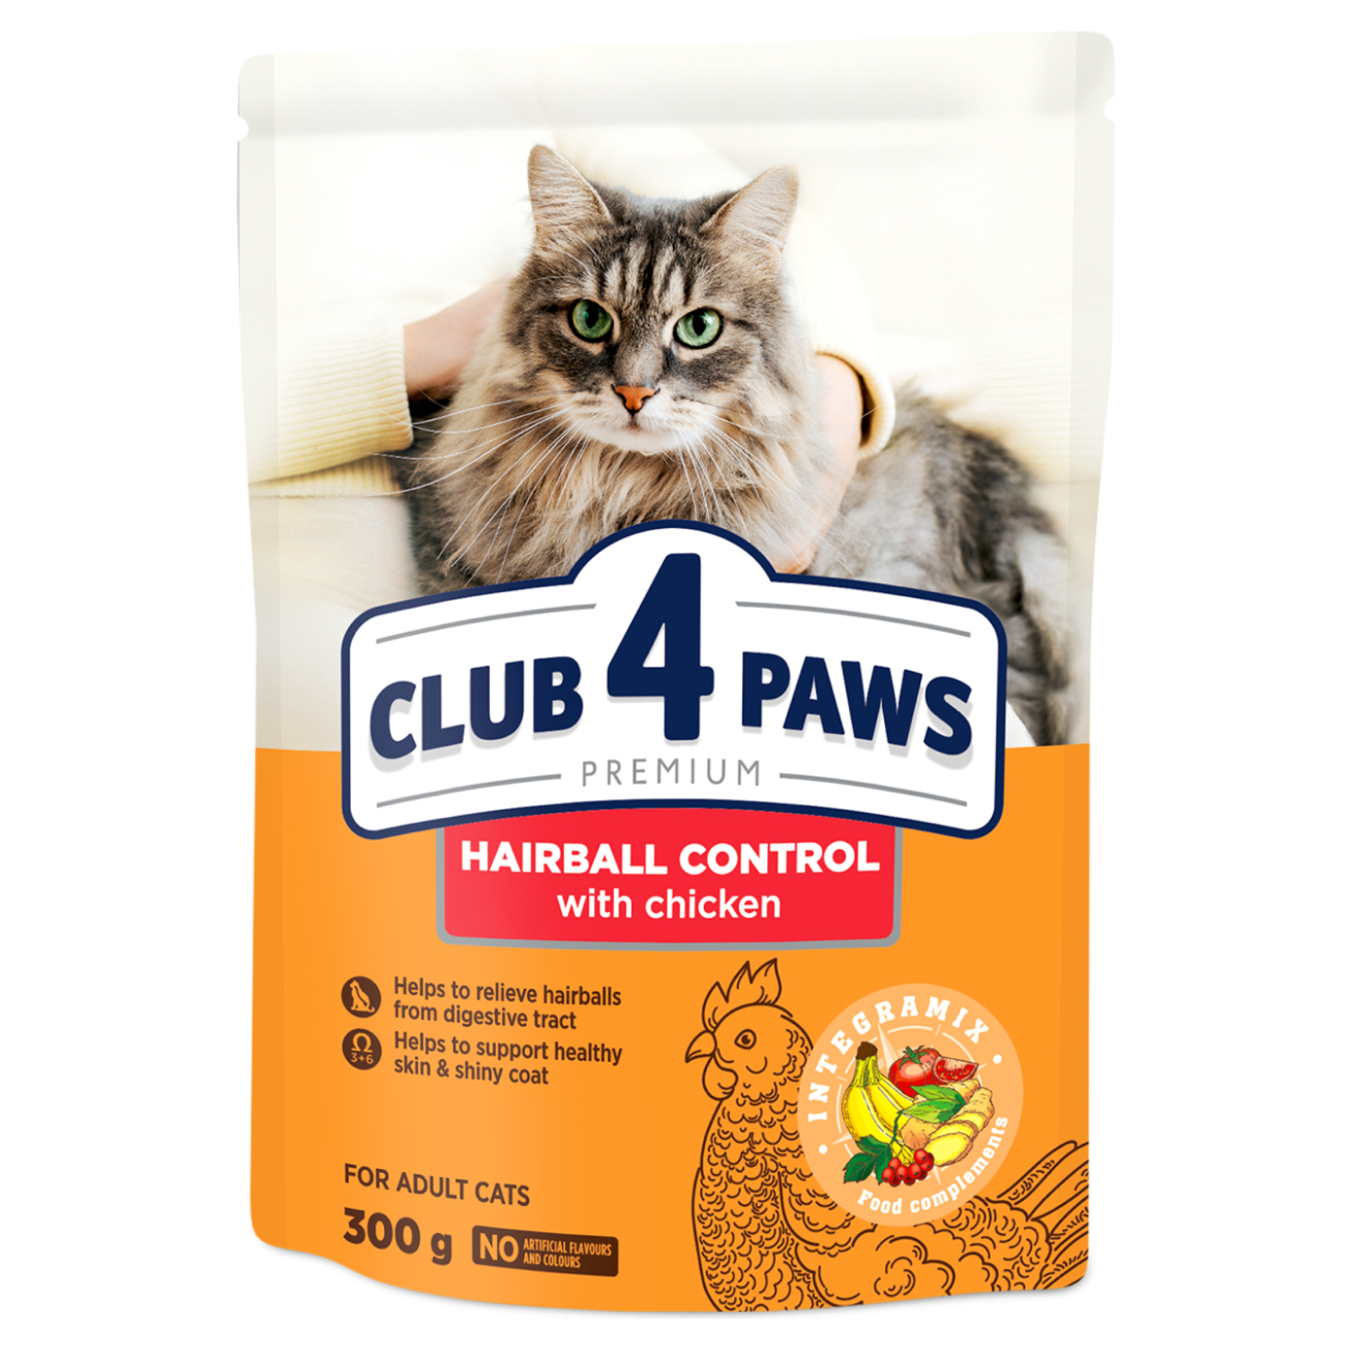 Feed Club 4 paws Premium with the effect of removing wool 300g